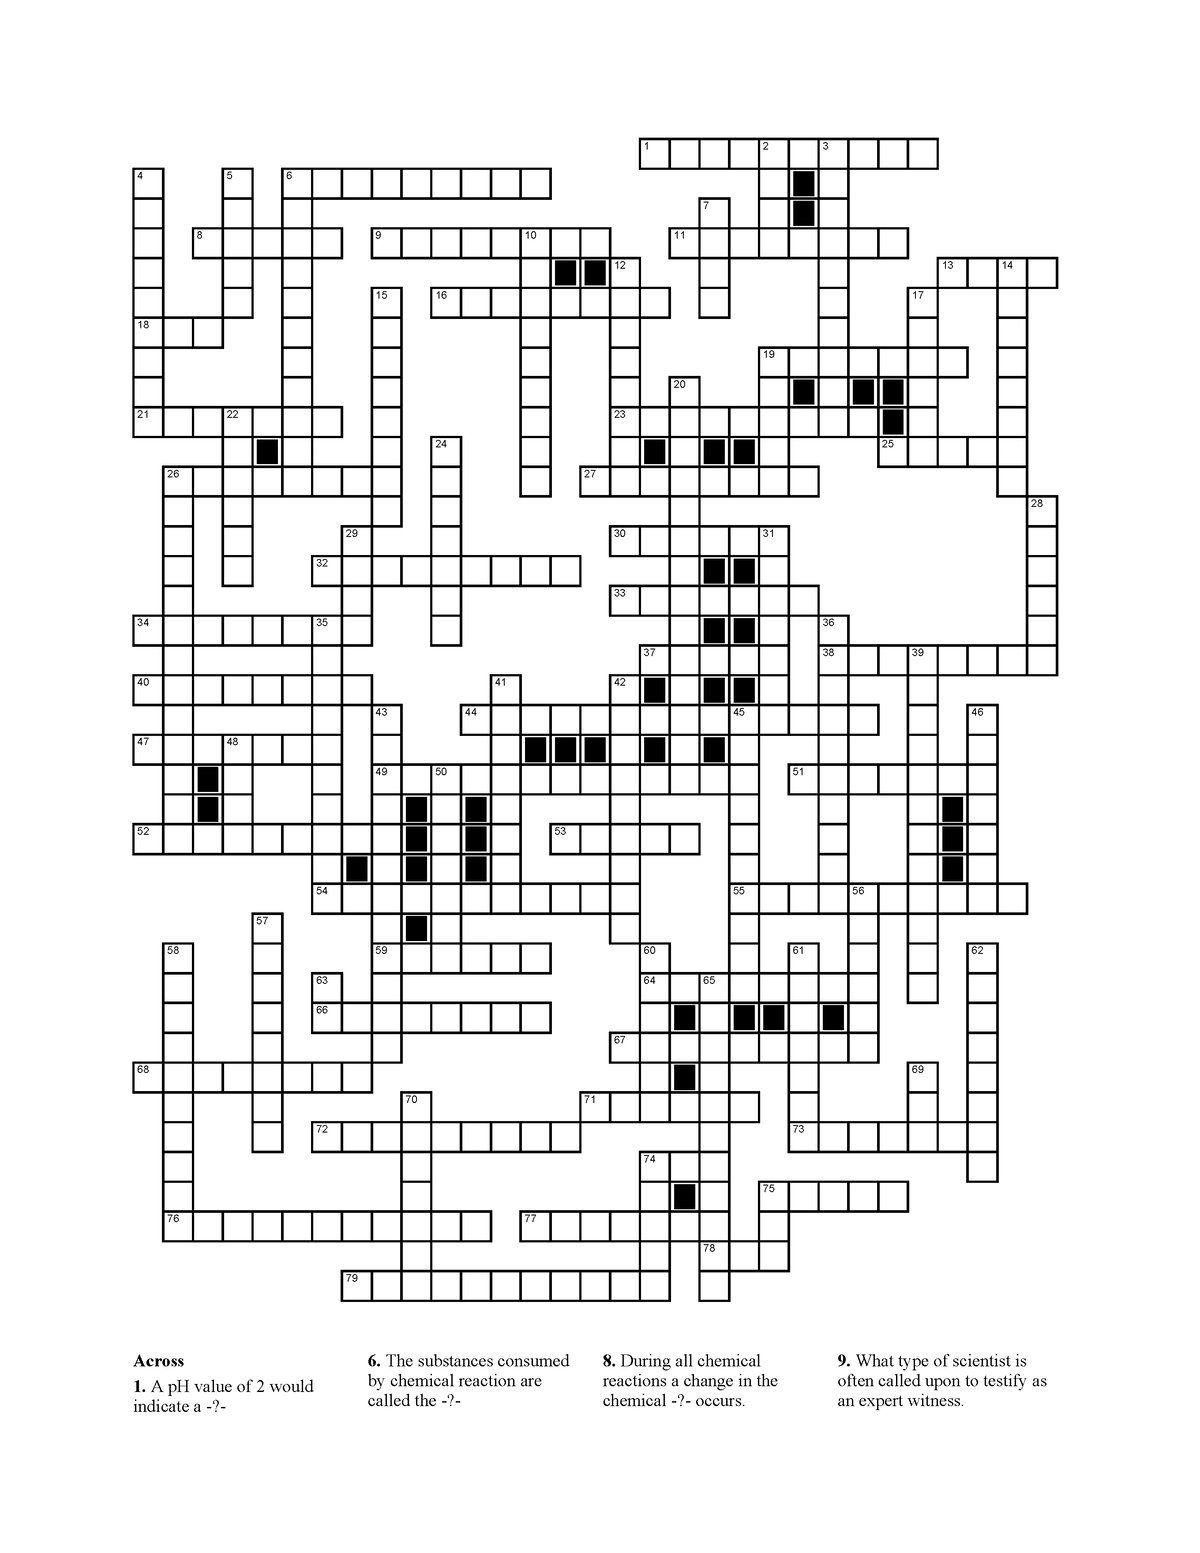 Ch 2 crossword 2020 scince class Across A pH value of 2 would